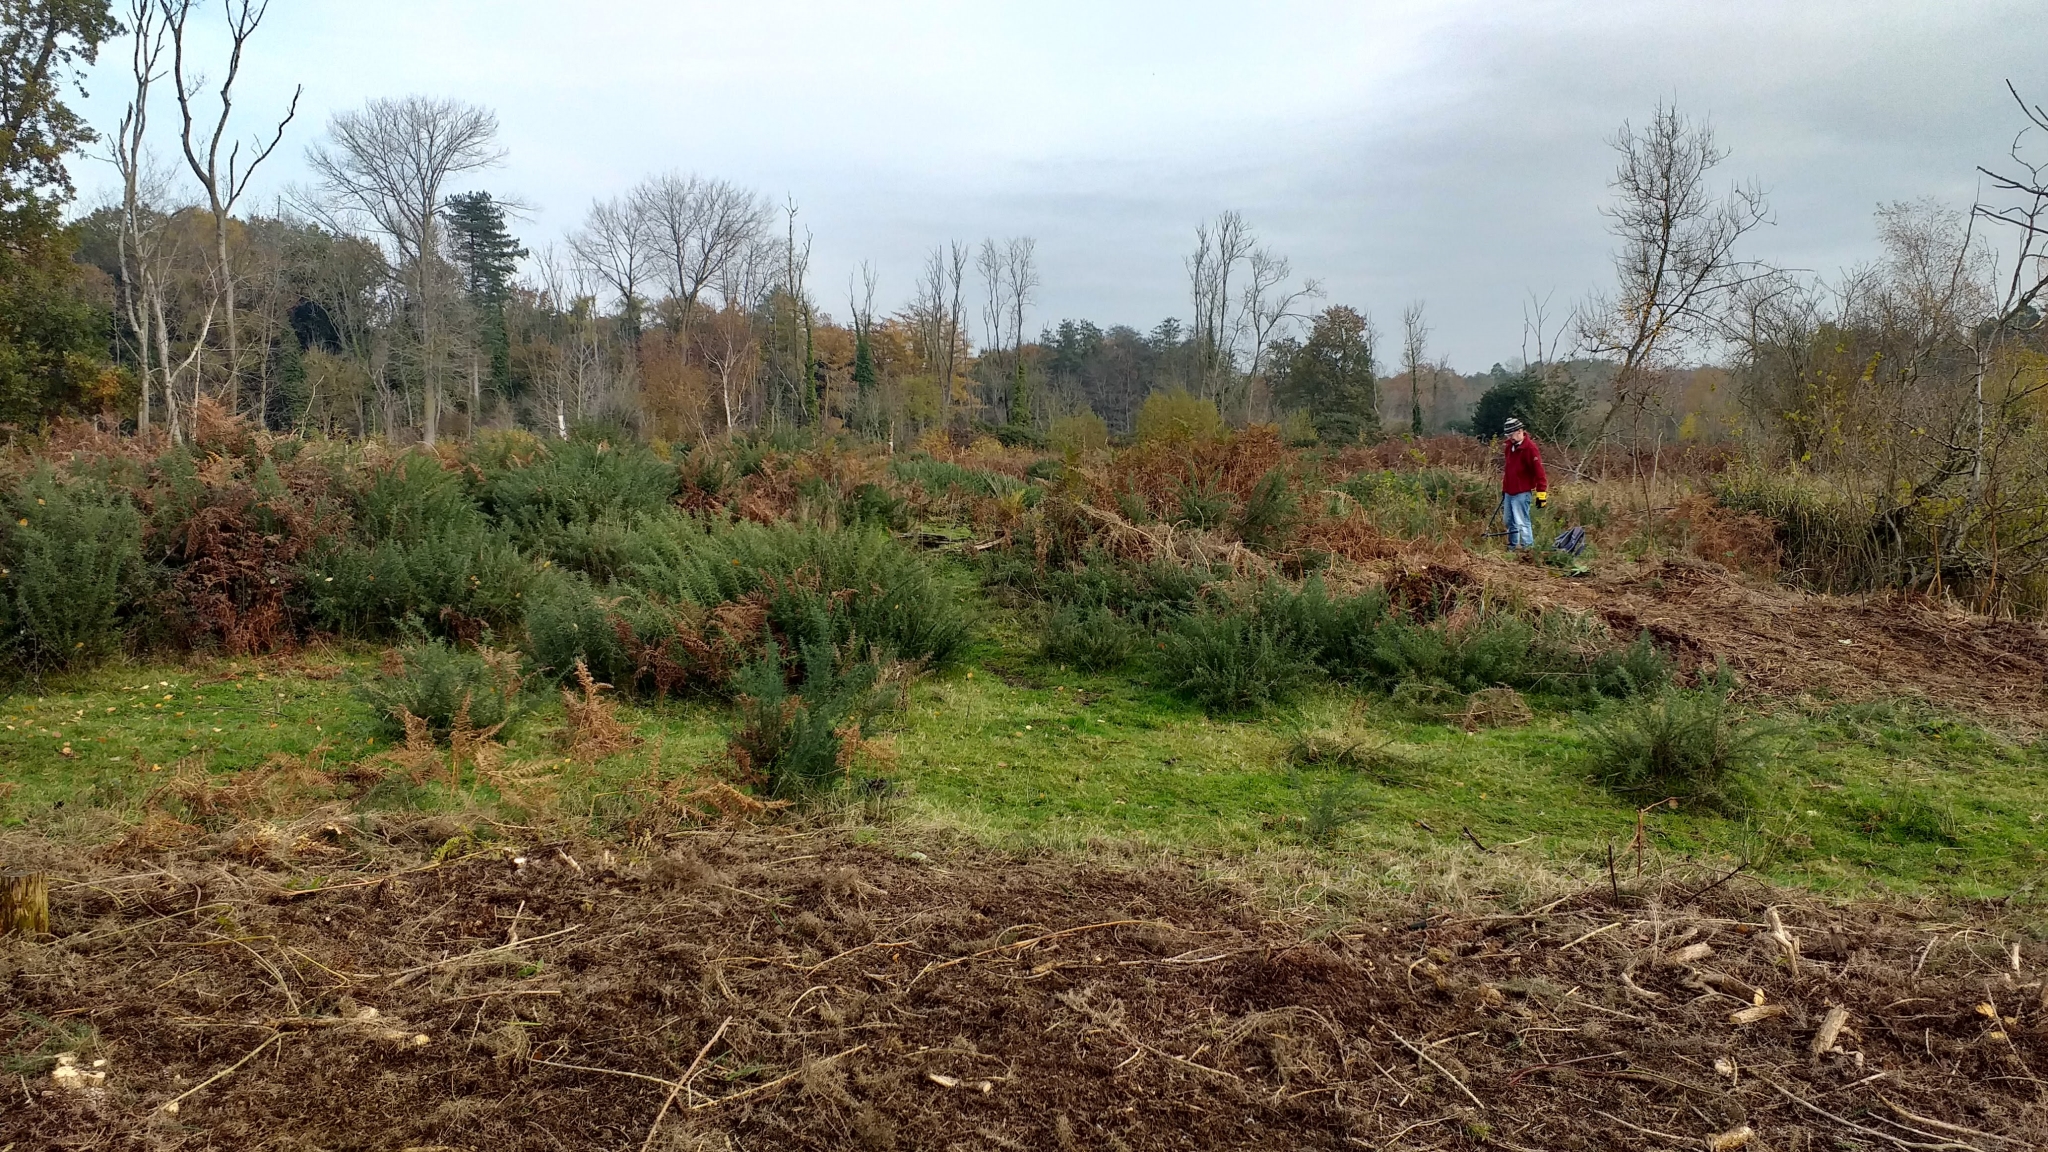 A photo from the FoTF Conservation Event - November 2019 - Gorse Clearance at Hockham Hills & Holes : A volunteer amongst the Gorse